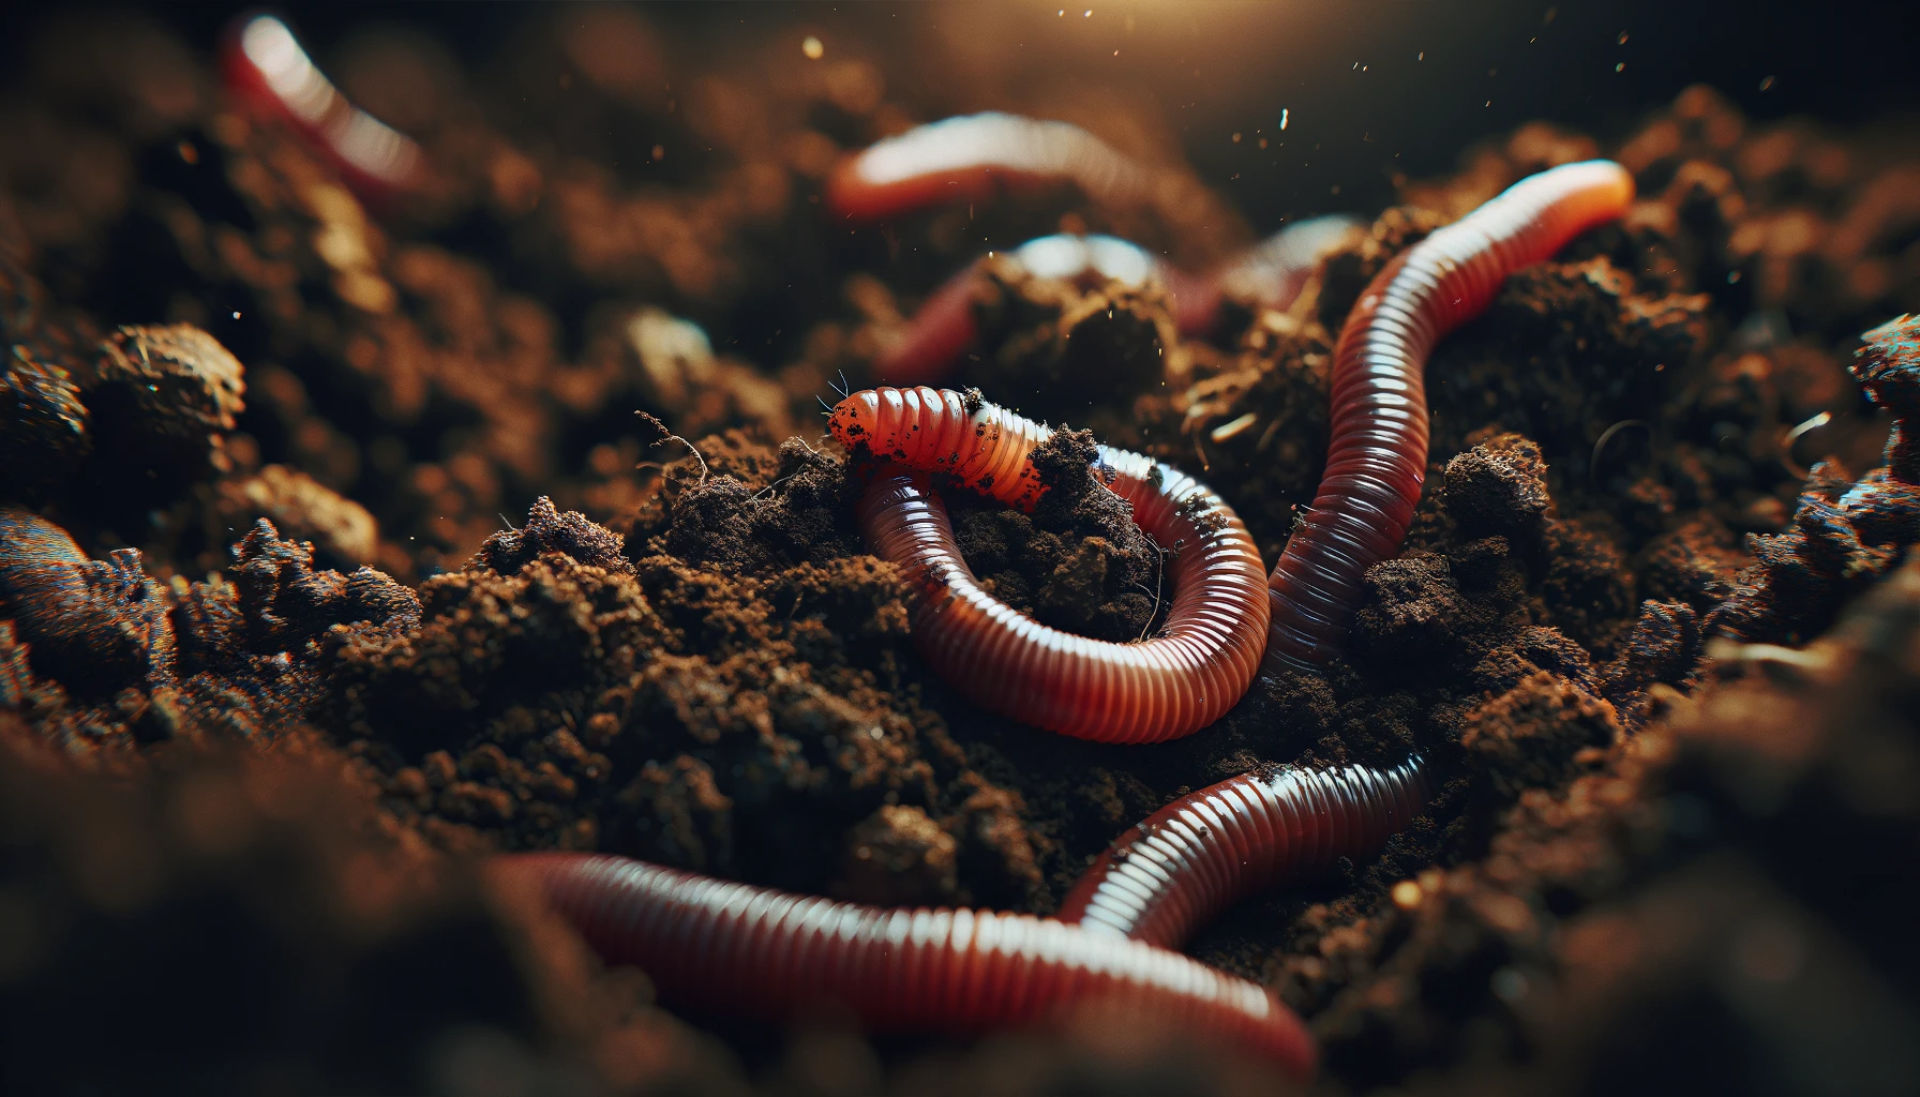 The Worms Behind Vermicomposting: The first image showcases a close-up view of red wiggler worms in rich, dark soil, emphasizing the texture and details of the worms and the surrounding earth.